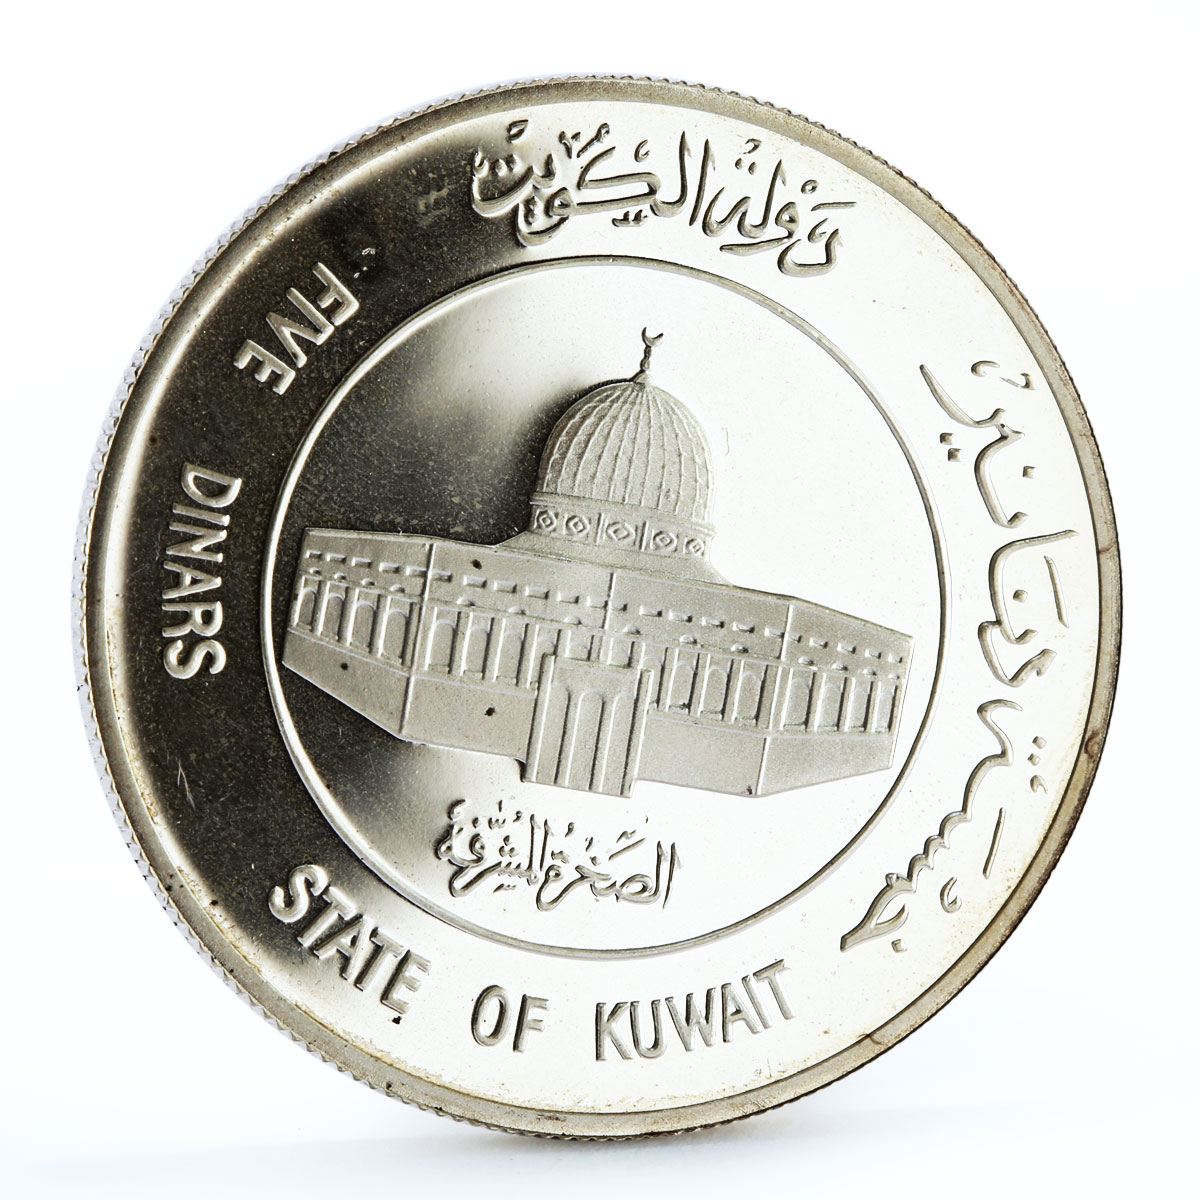 Kuwait 5 dinars Beginning of 15th Hijra Century Dome of Rock silver coin 1981